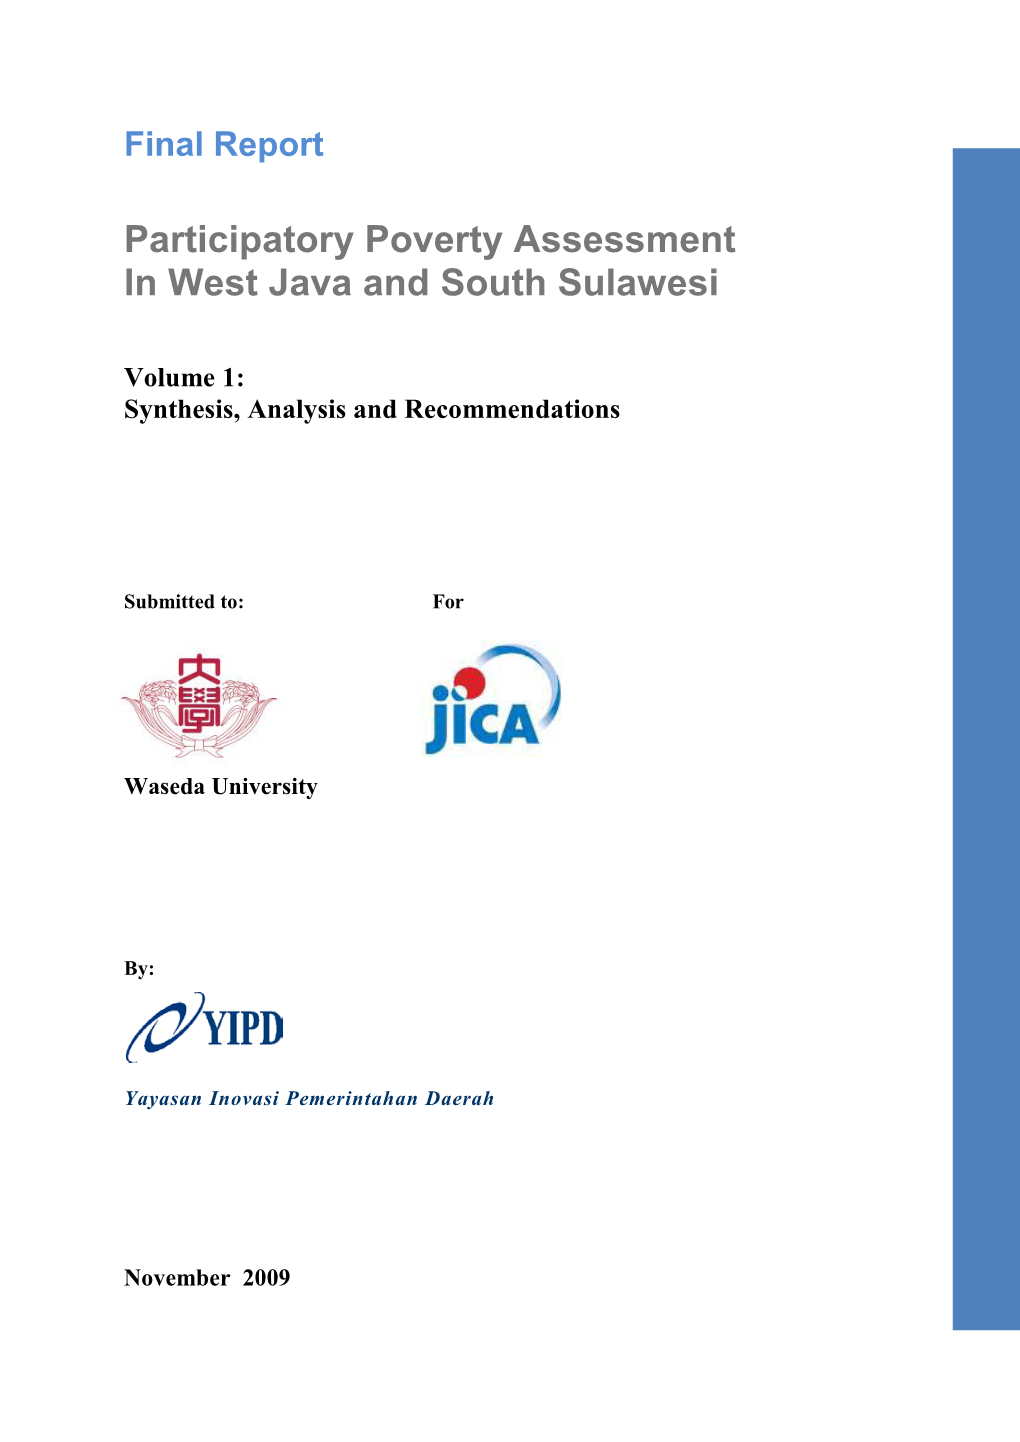 Participatory Poverty Assessment in West Java and South Sulawesi